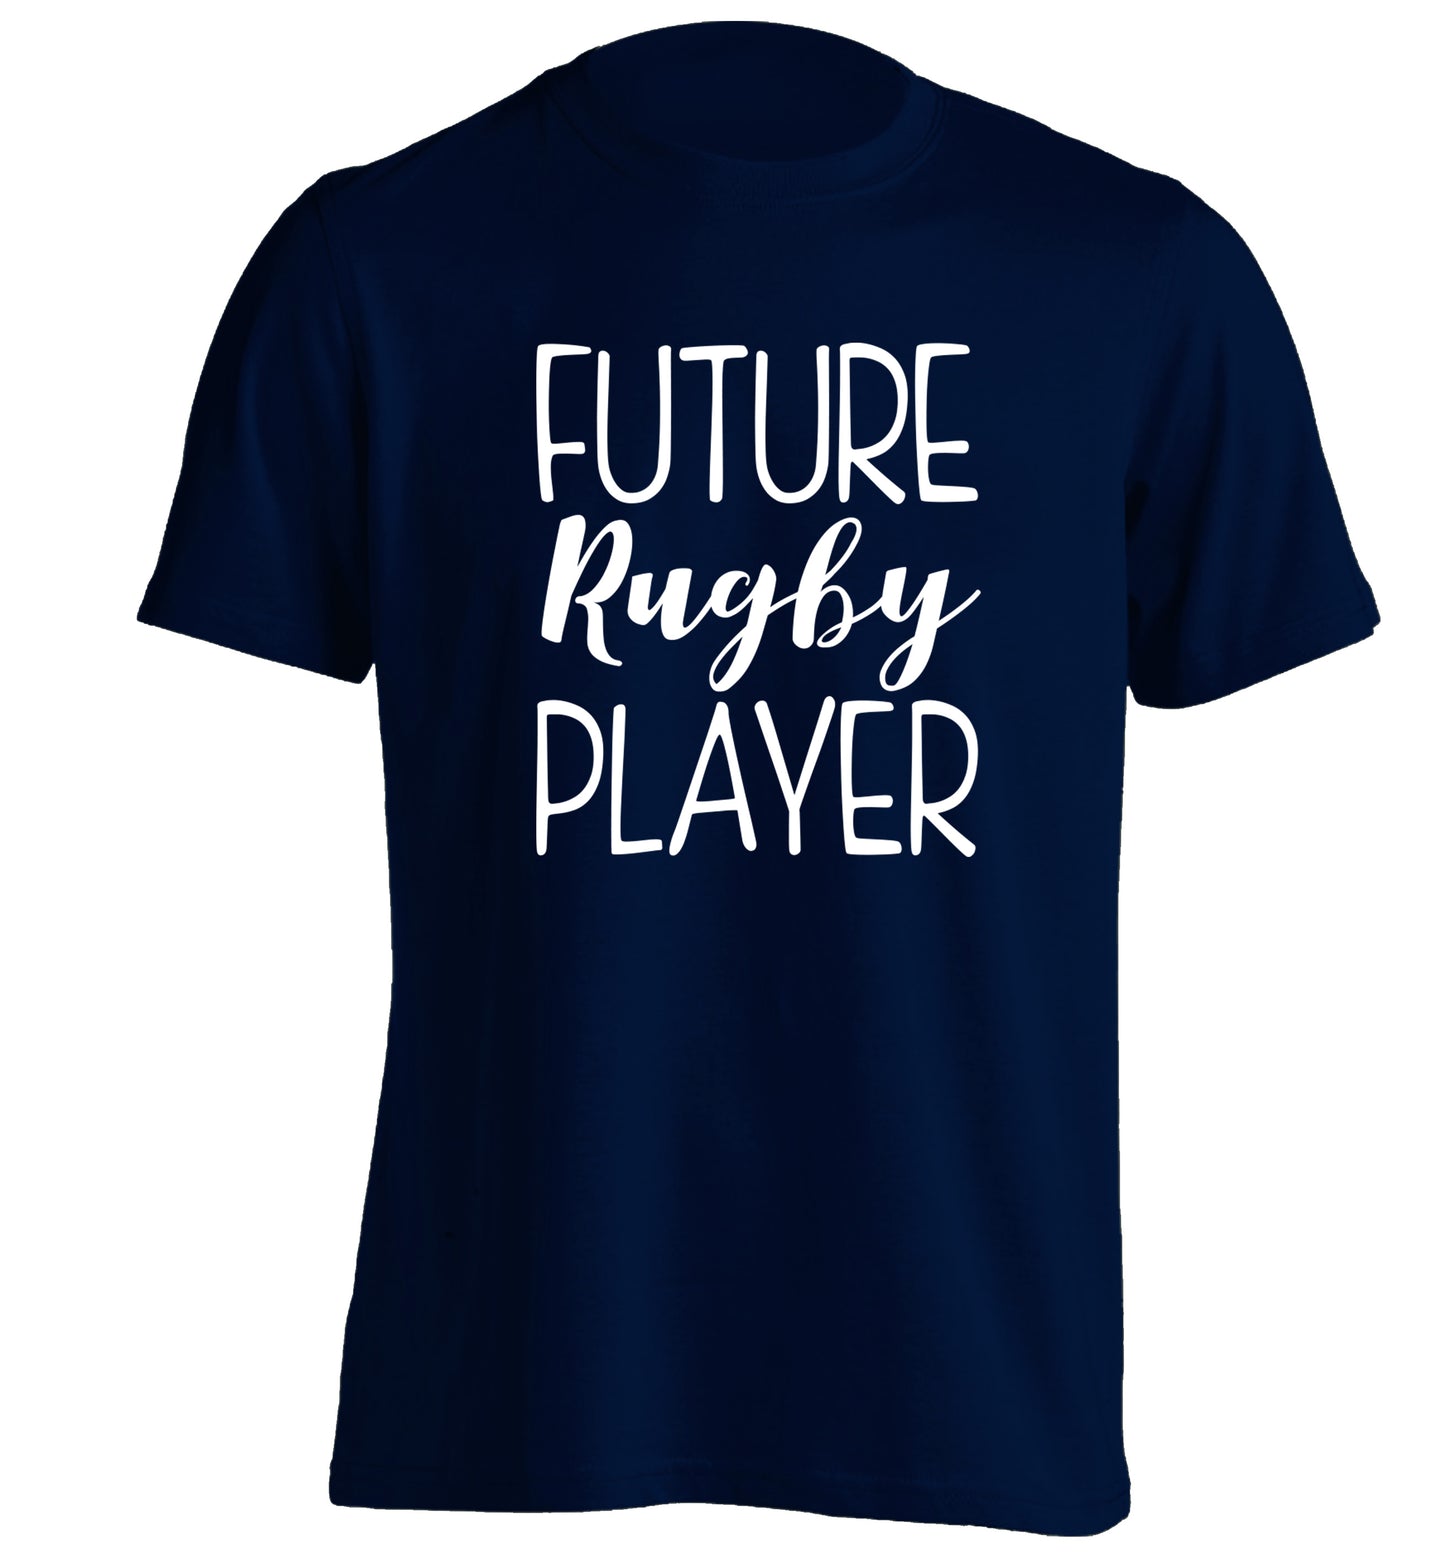 Future rugby player adults unisex navy Tshirt 2XL